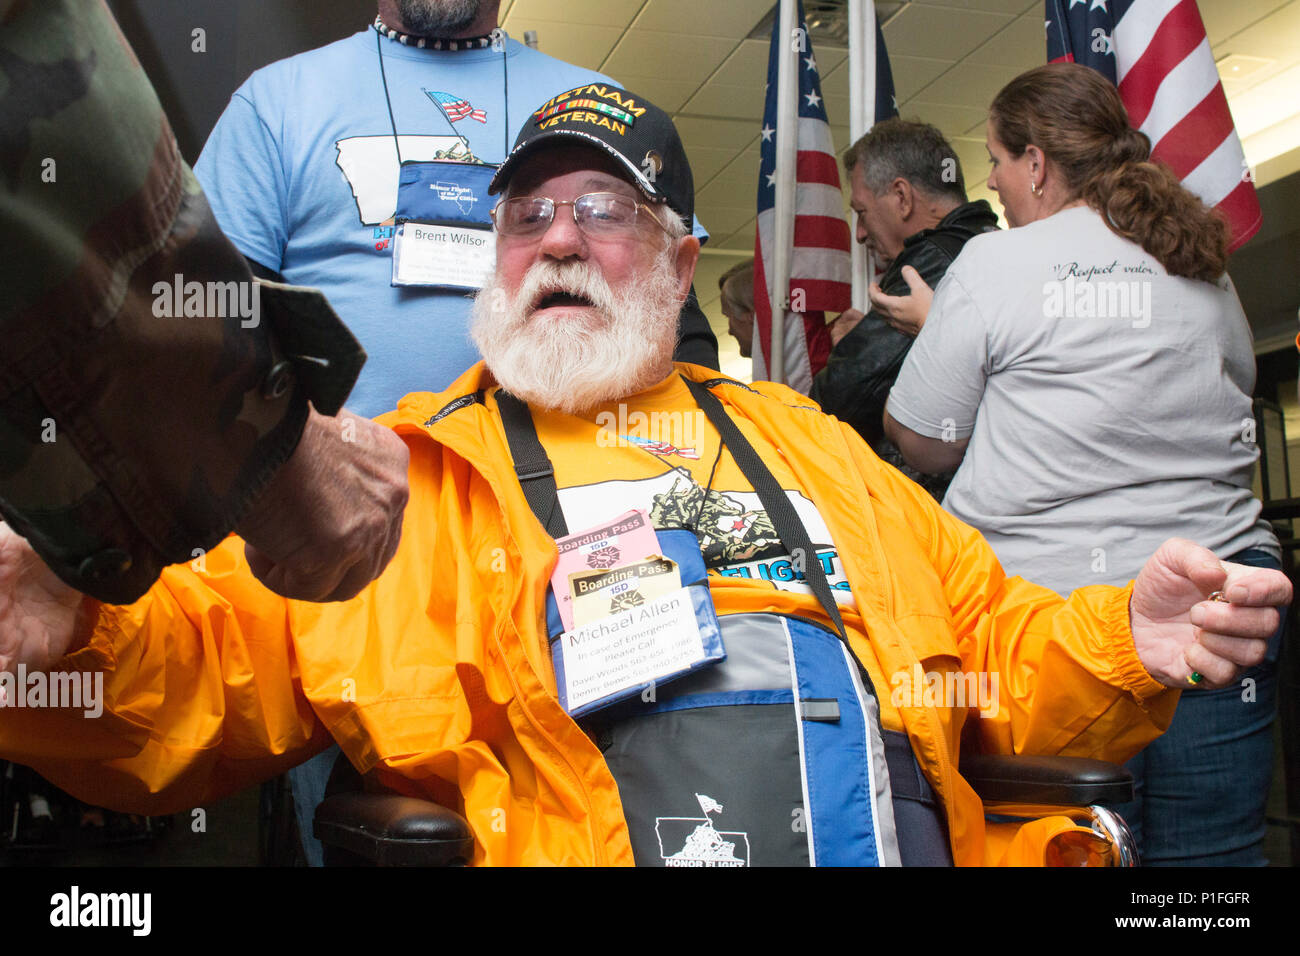 A veteran receives a set of “honor beads” after deboarding an honor flight at the Quad City International Airport, Ill., Oct. 27, 2016. Honor Flight of the Quad Cities, a chapter of the Honor Flight Network, organizes flights for veterans of World War II and the Korean and Vietnam Wars to visit memorials dedicated to them in Washington, D.C. Volunteers, known as “guardians,” accompany the veterans to keep them company and assist as needed. Approximately 95 veterans and 65 guardians participated in this flight. (Photo by Staff Sgt. Ian M. Kummer, First Army Public Affairs) Stock Photo